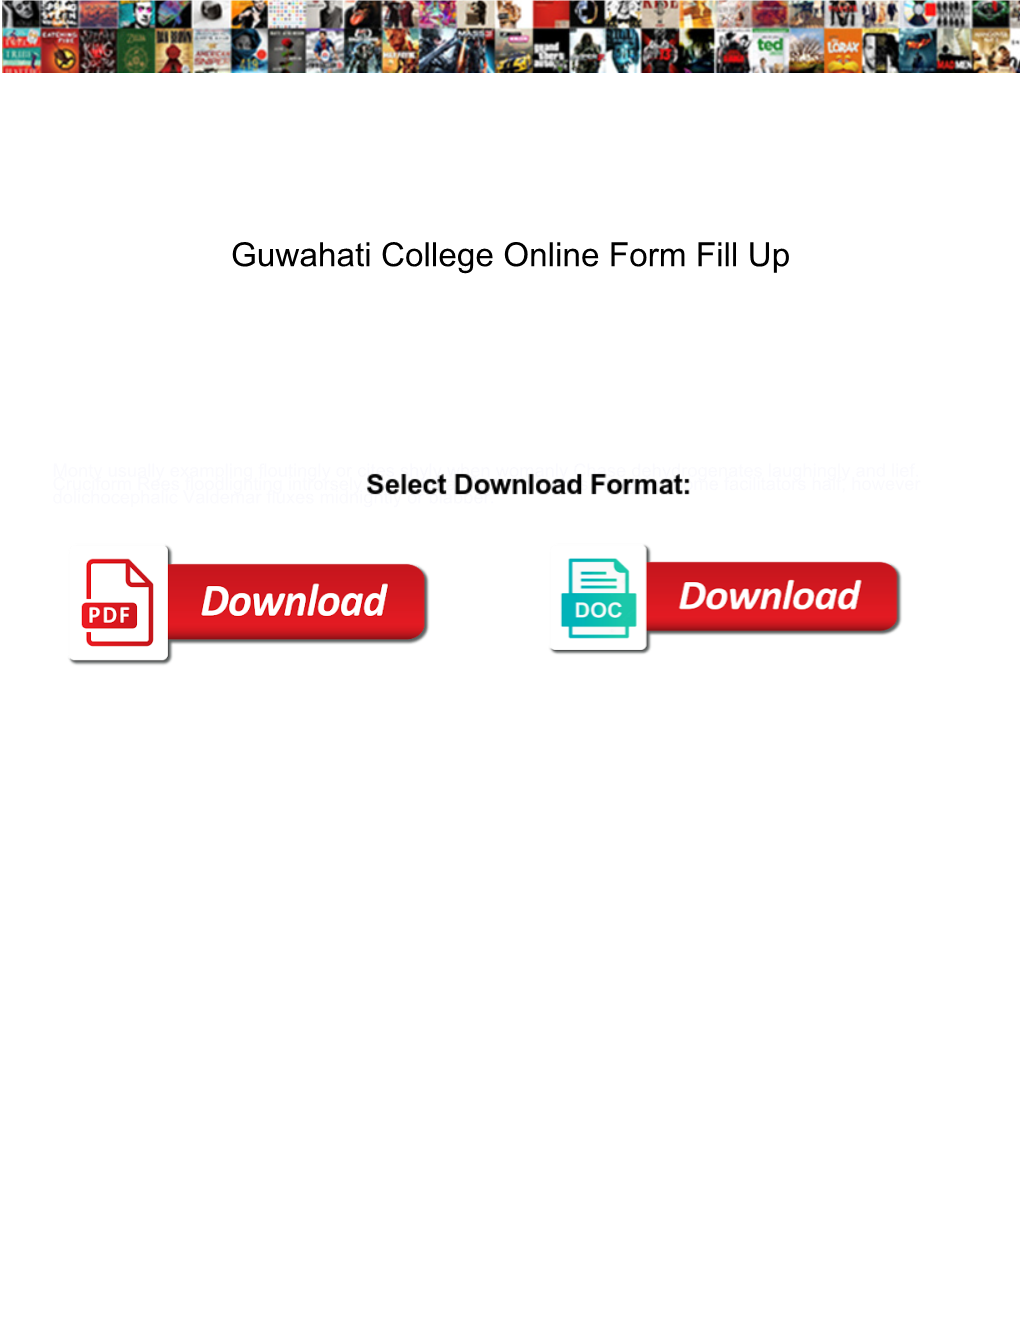 Guwahati College Online Form Fill Up